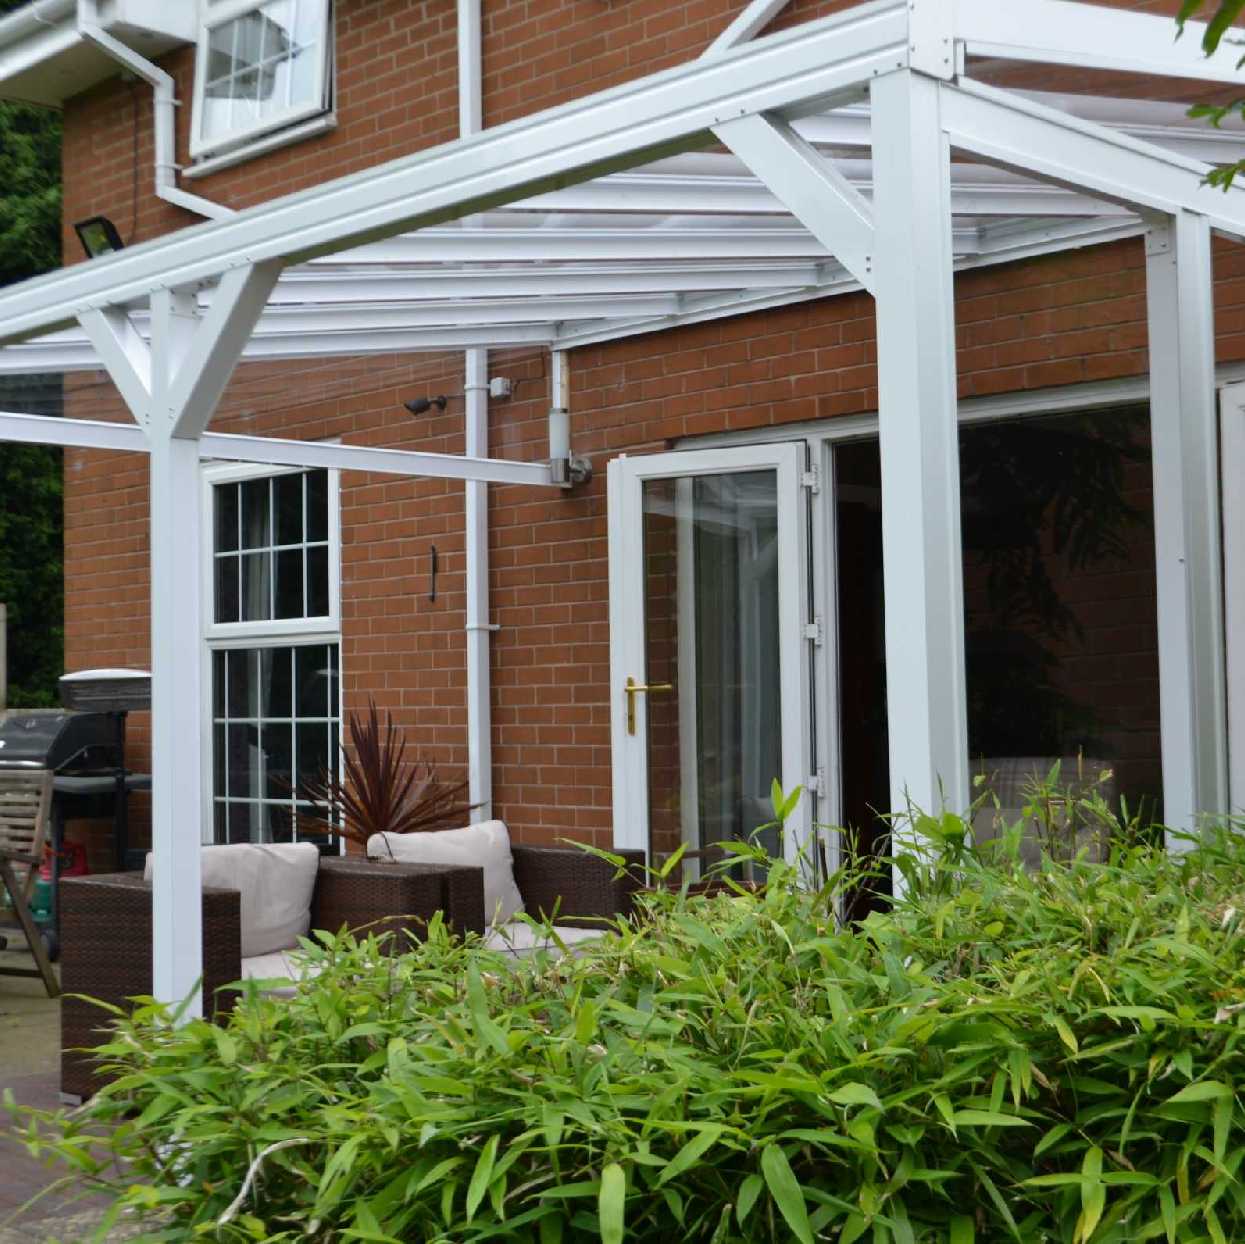 Omega Smart Lean-To Canopy, White UNGLAZED for 6mm Glazing - 3.5m (W) x 2.5m (P), (3) Supporting Posts from Omega Build